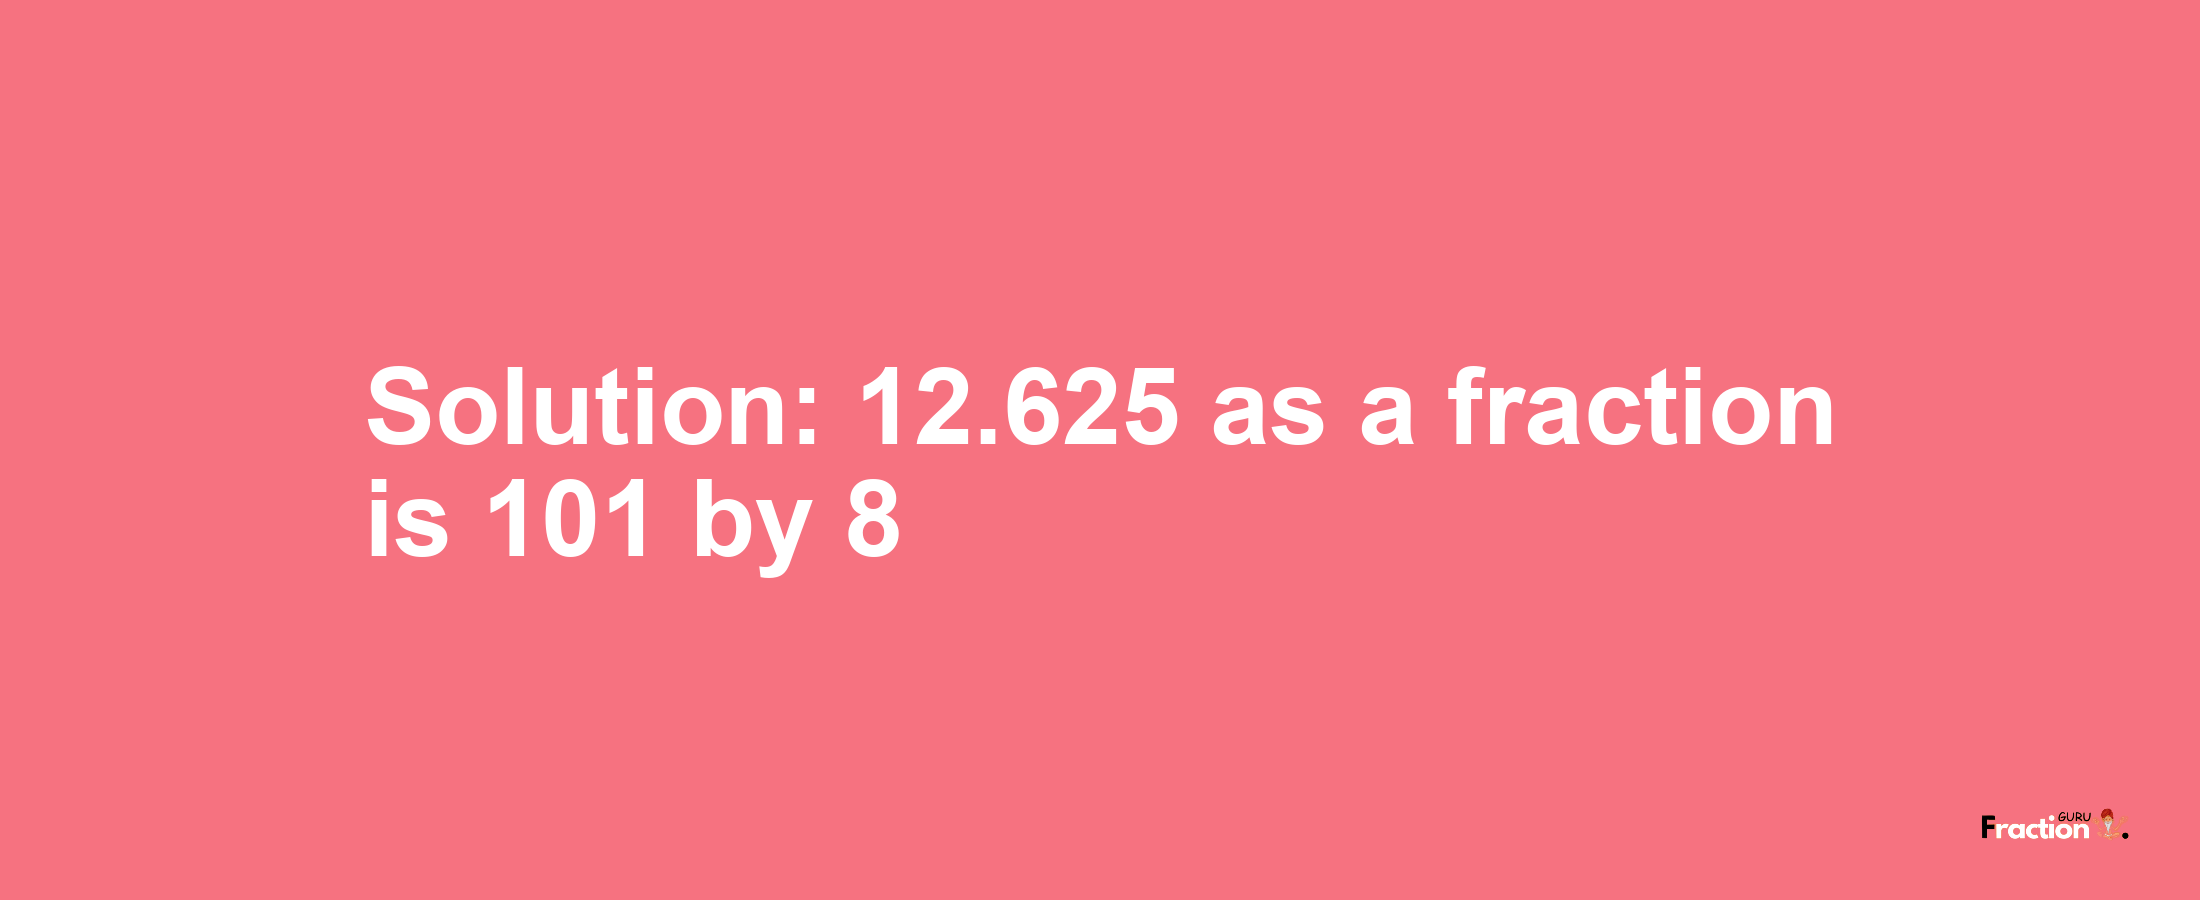 Solution:12.625 as a fraction is 101/8